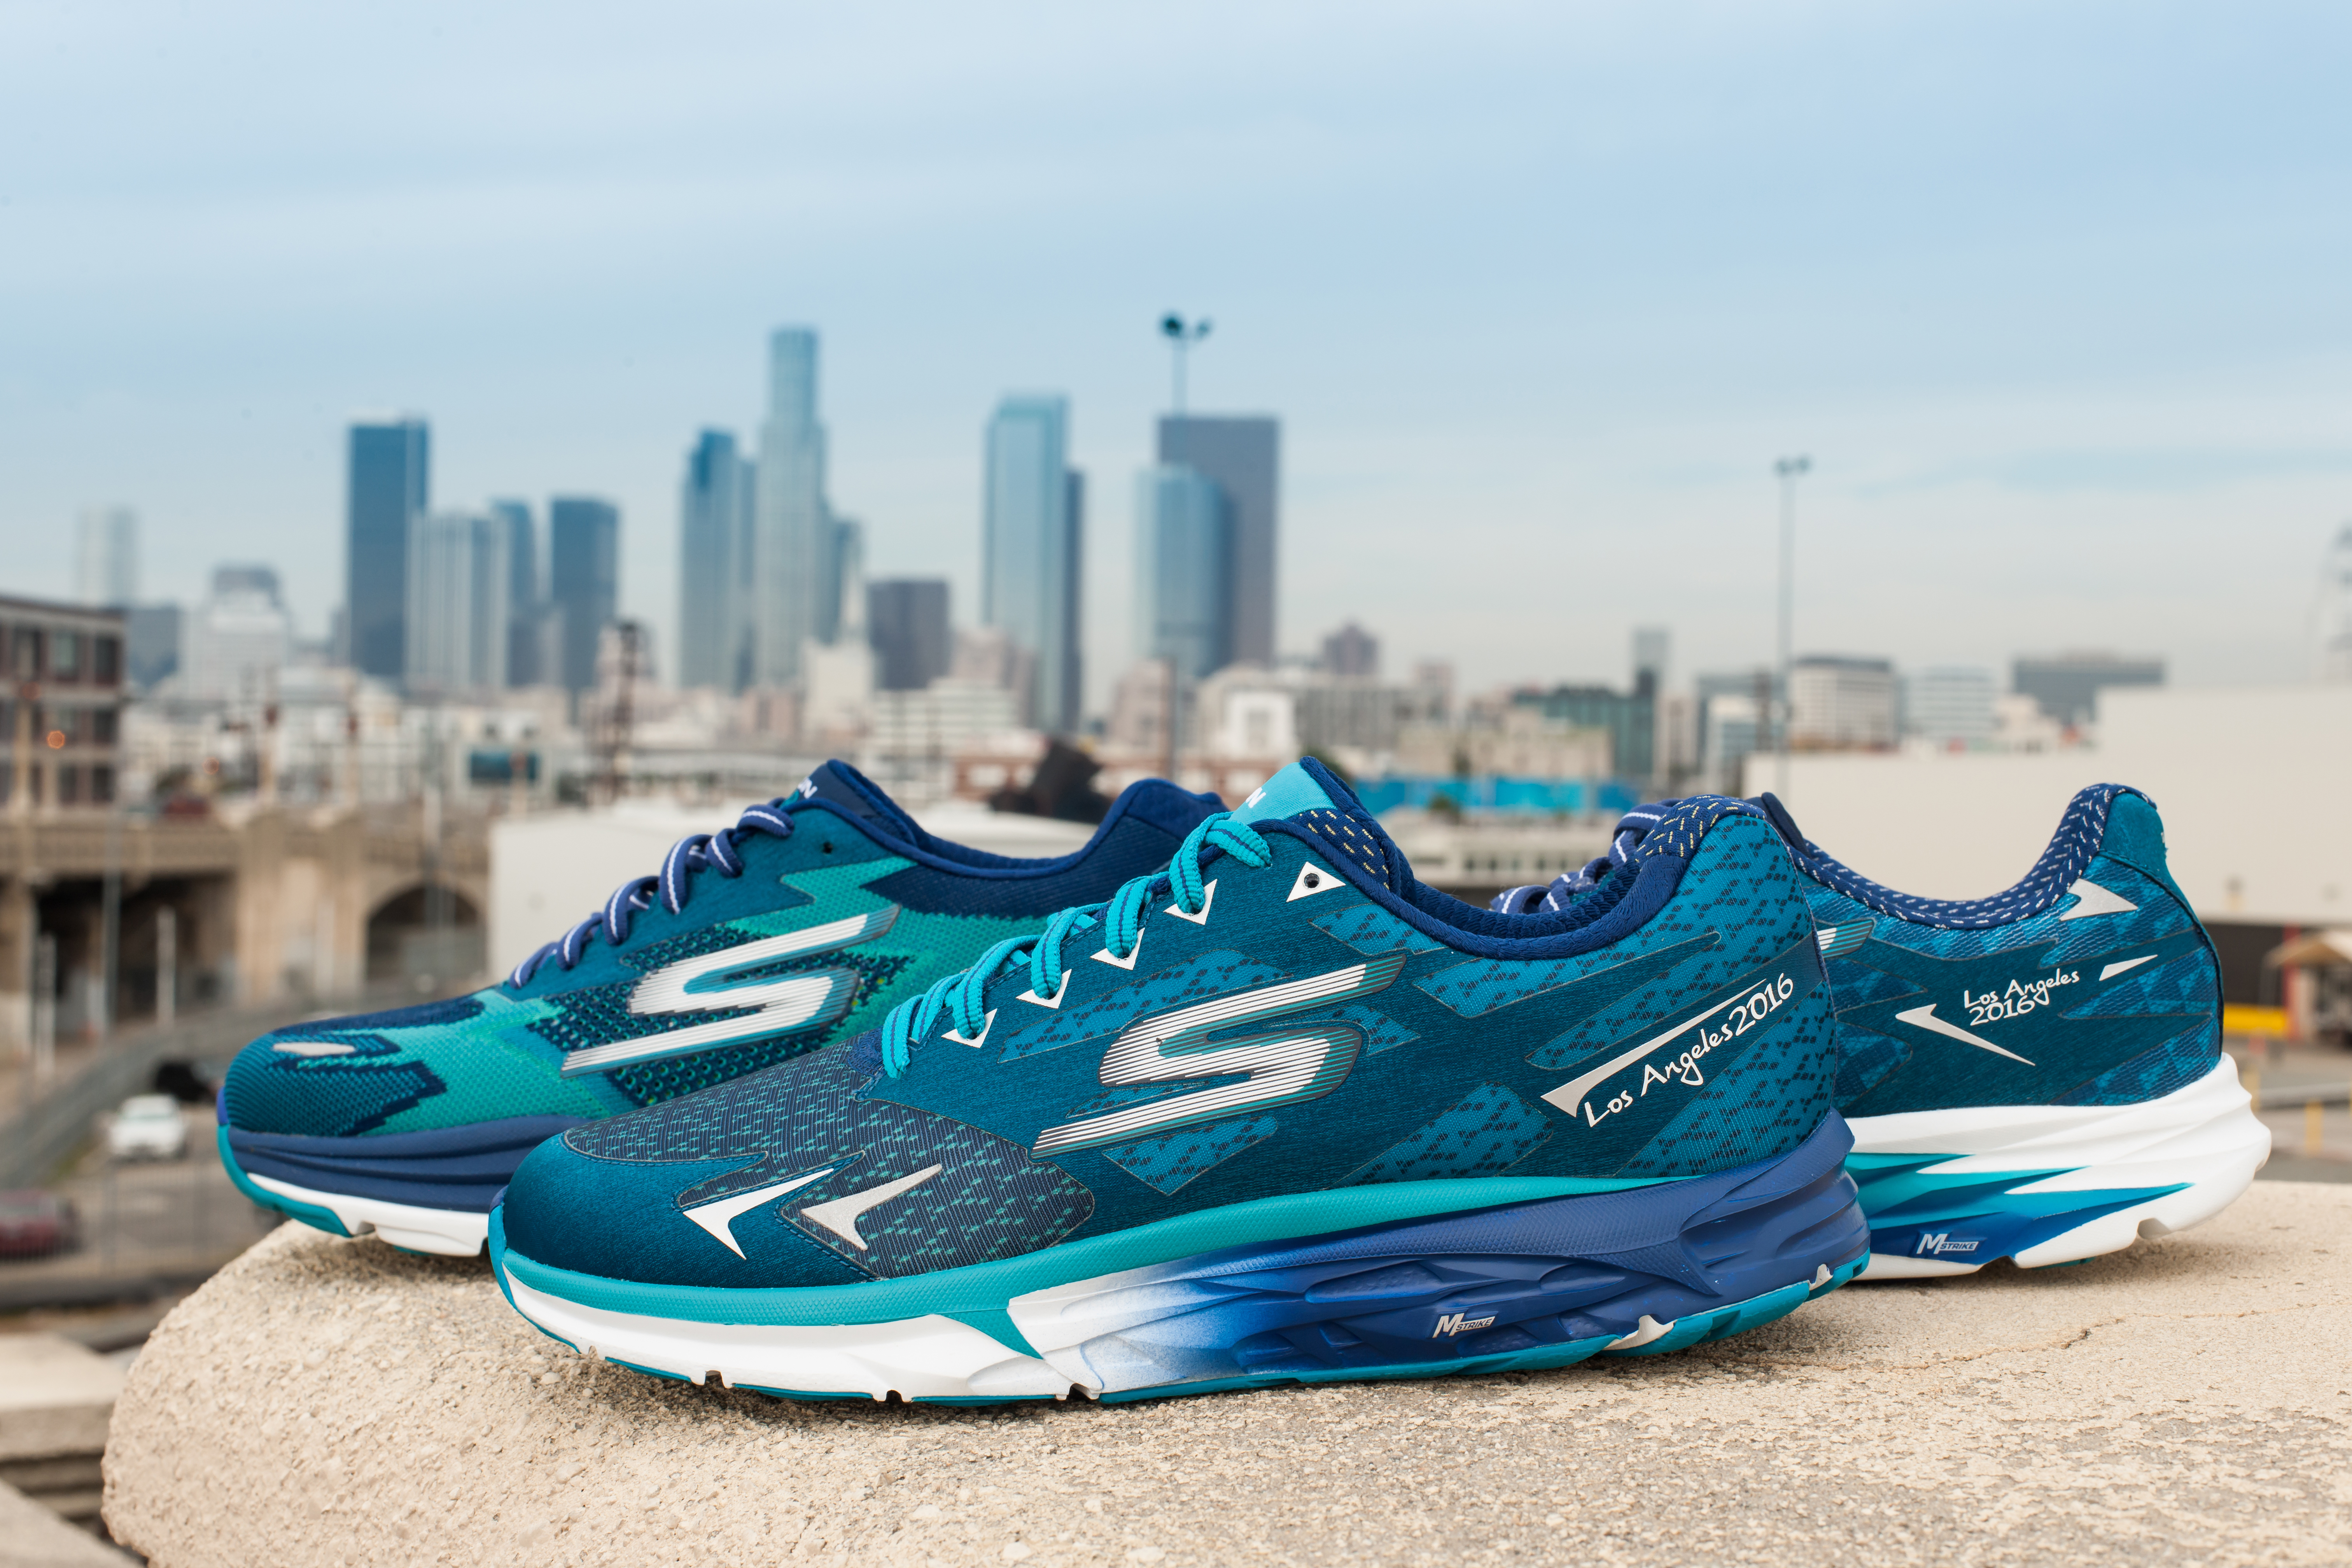 Skechers Gears up for Its Inaugural 